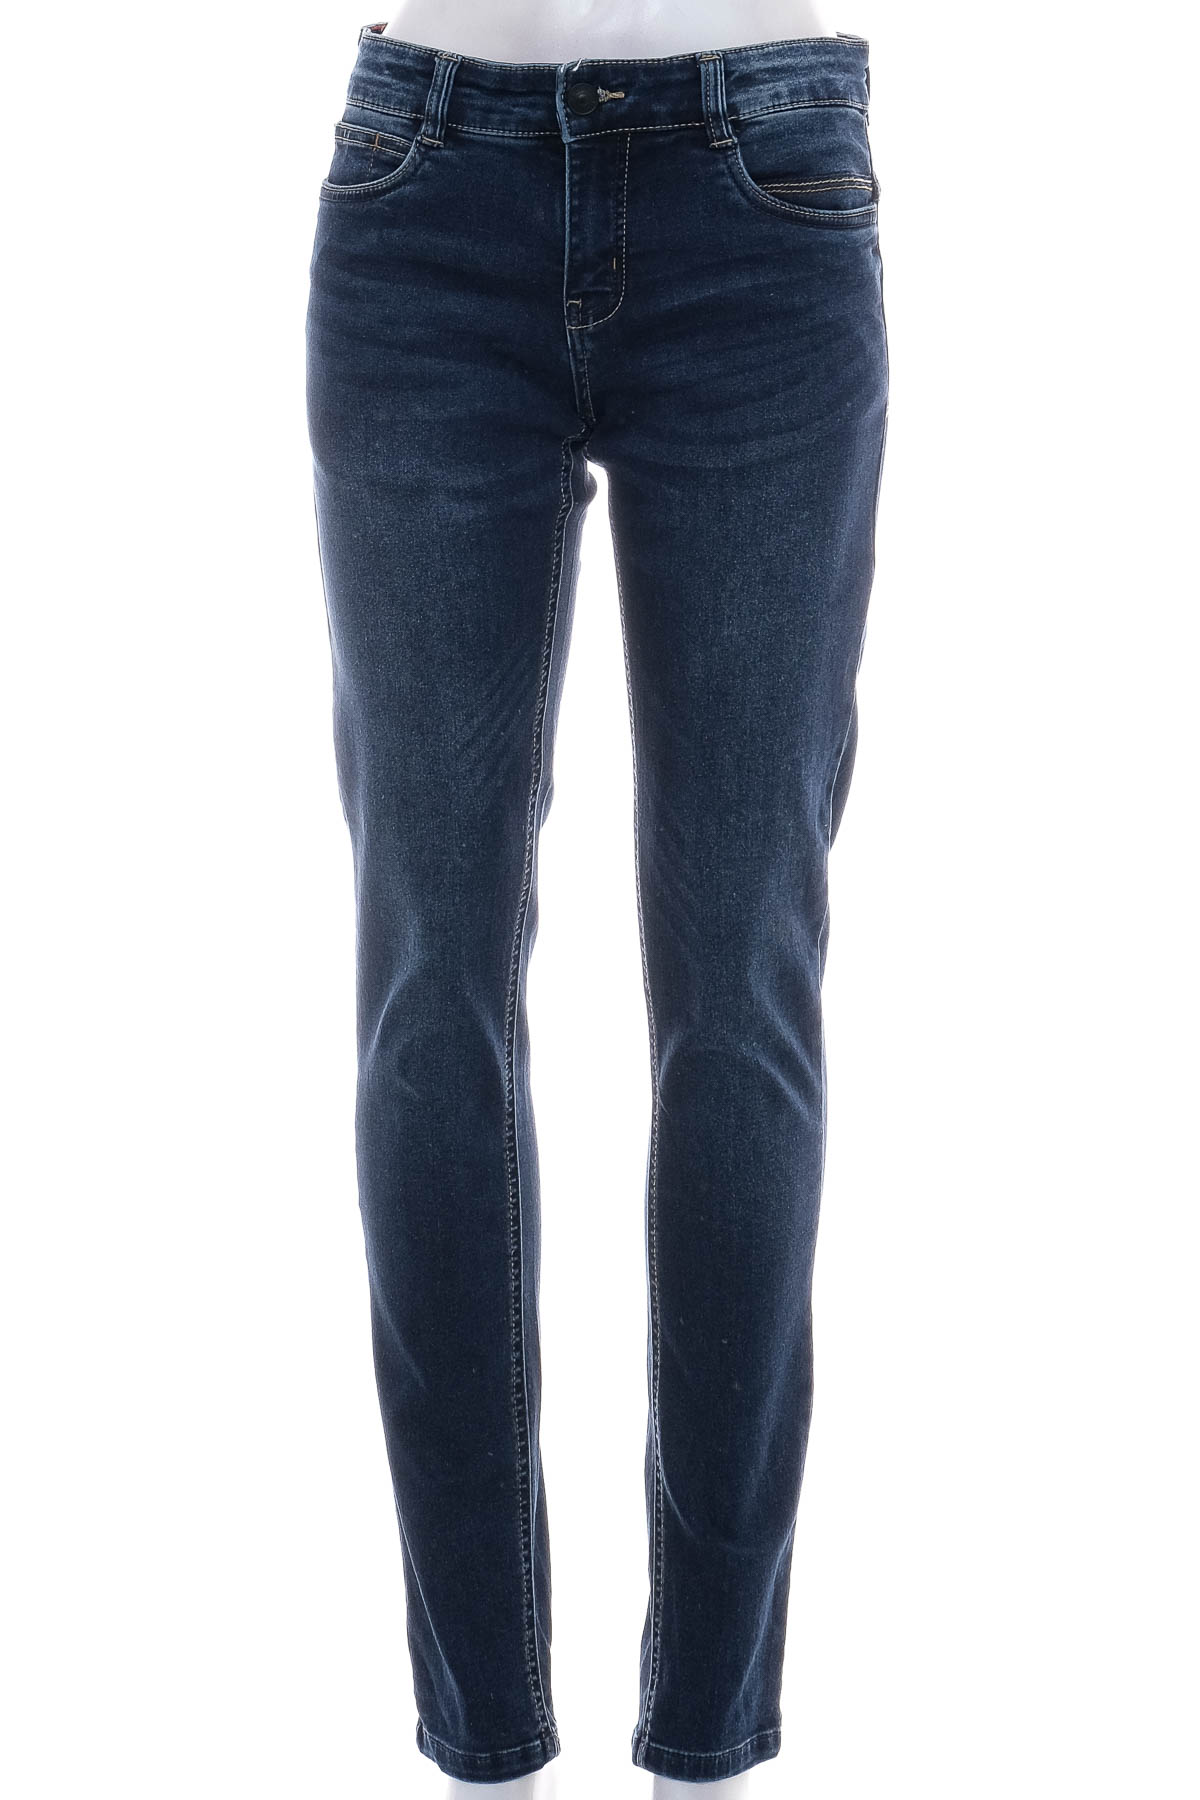 bpc bonprix collection Jeans at reasonable prices, Secondhand